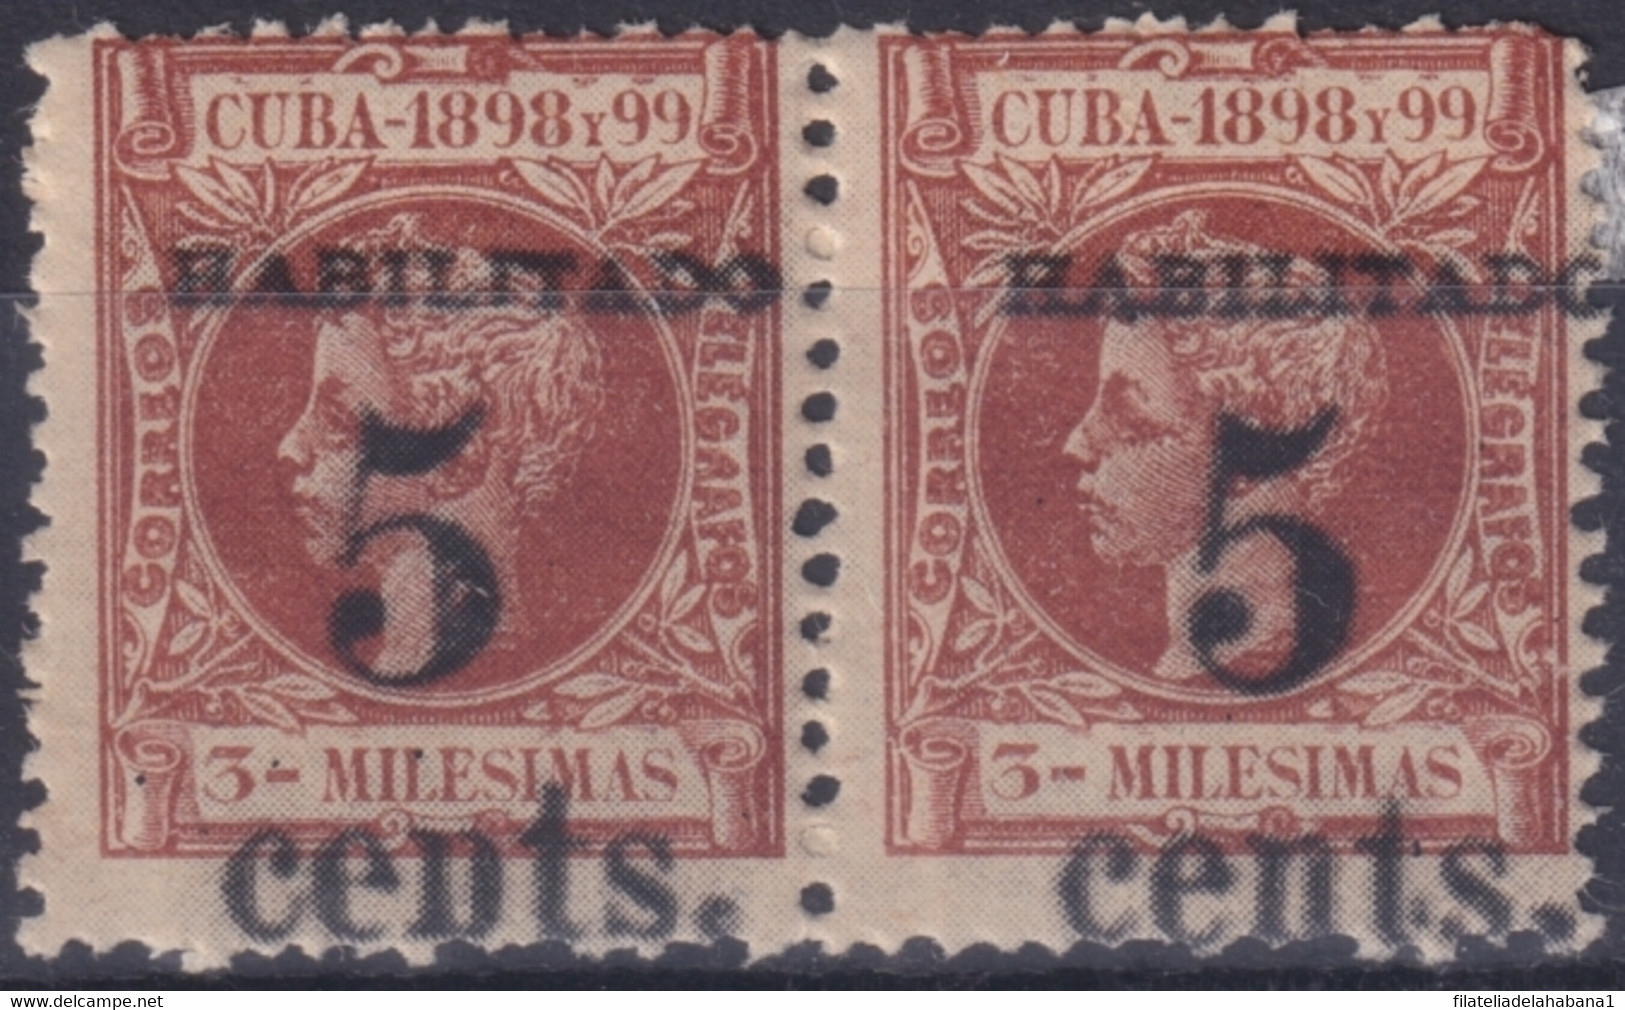 1899-481 CUBA 1899 5c S. 3c US OCCUPATION 2th ISSUE PAIR PHILATELIC FORGERY. - Ungebraucht